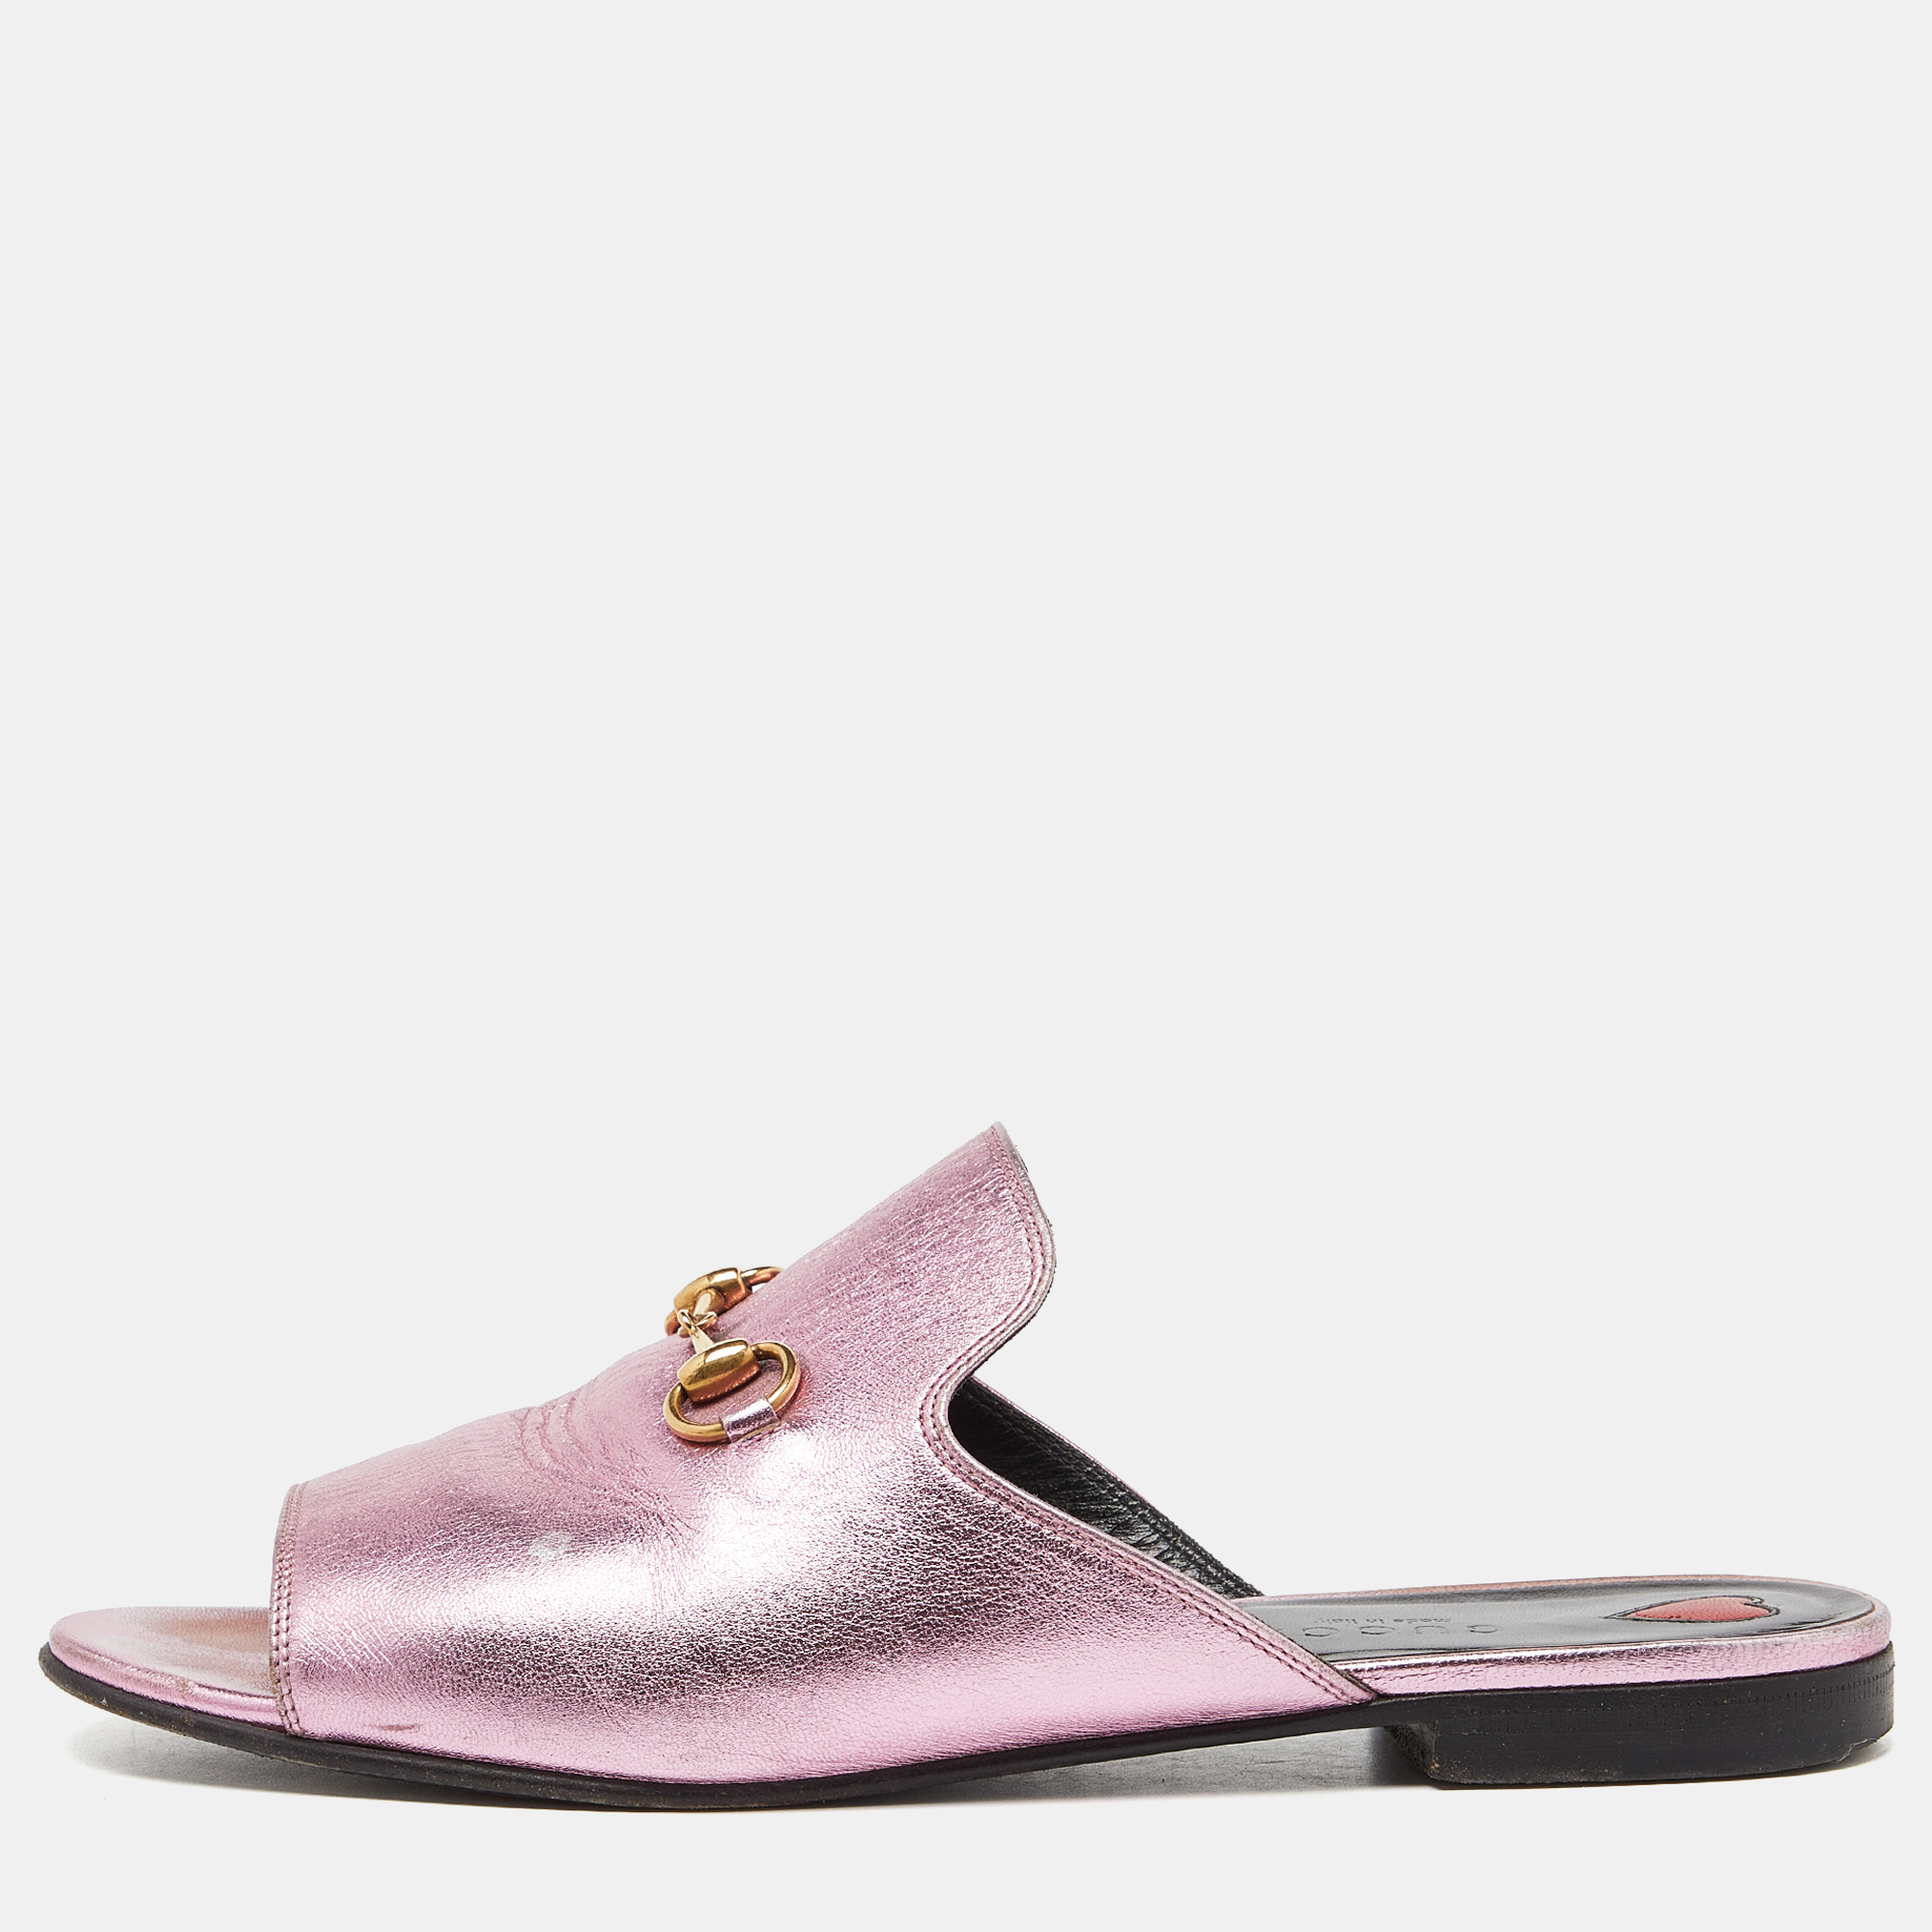 Pre-owned Gucci Pink Leather Horsebit Open Toe Flat Slides Size 38